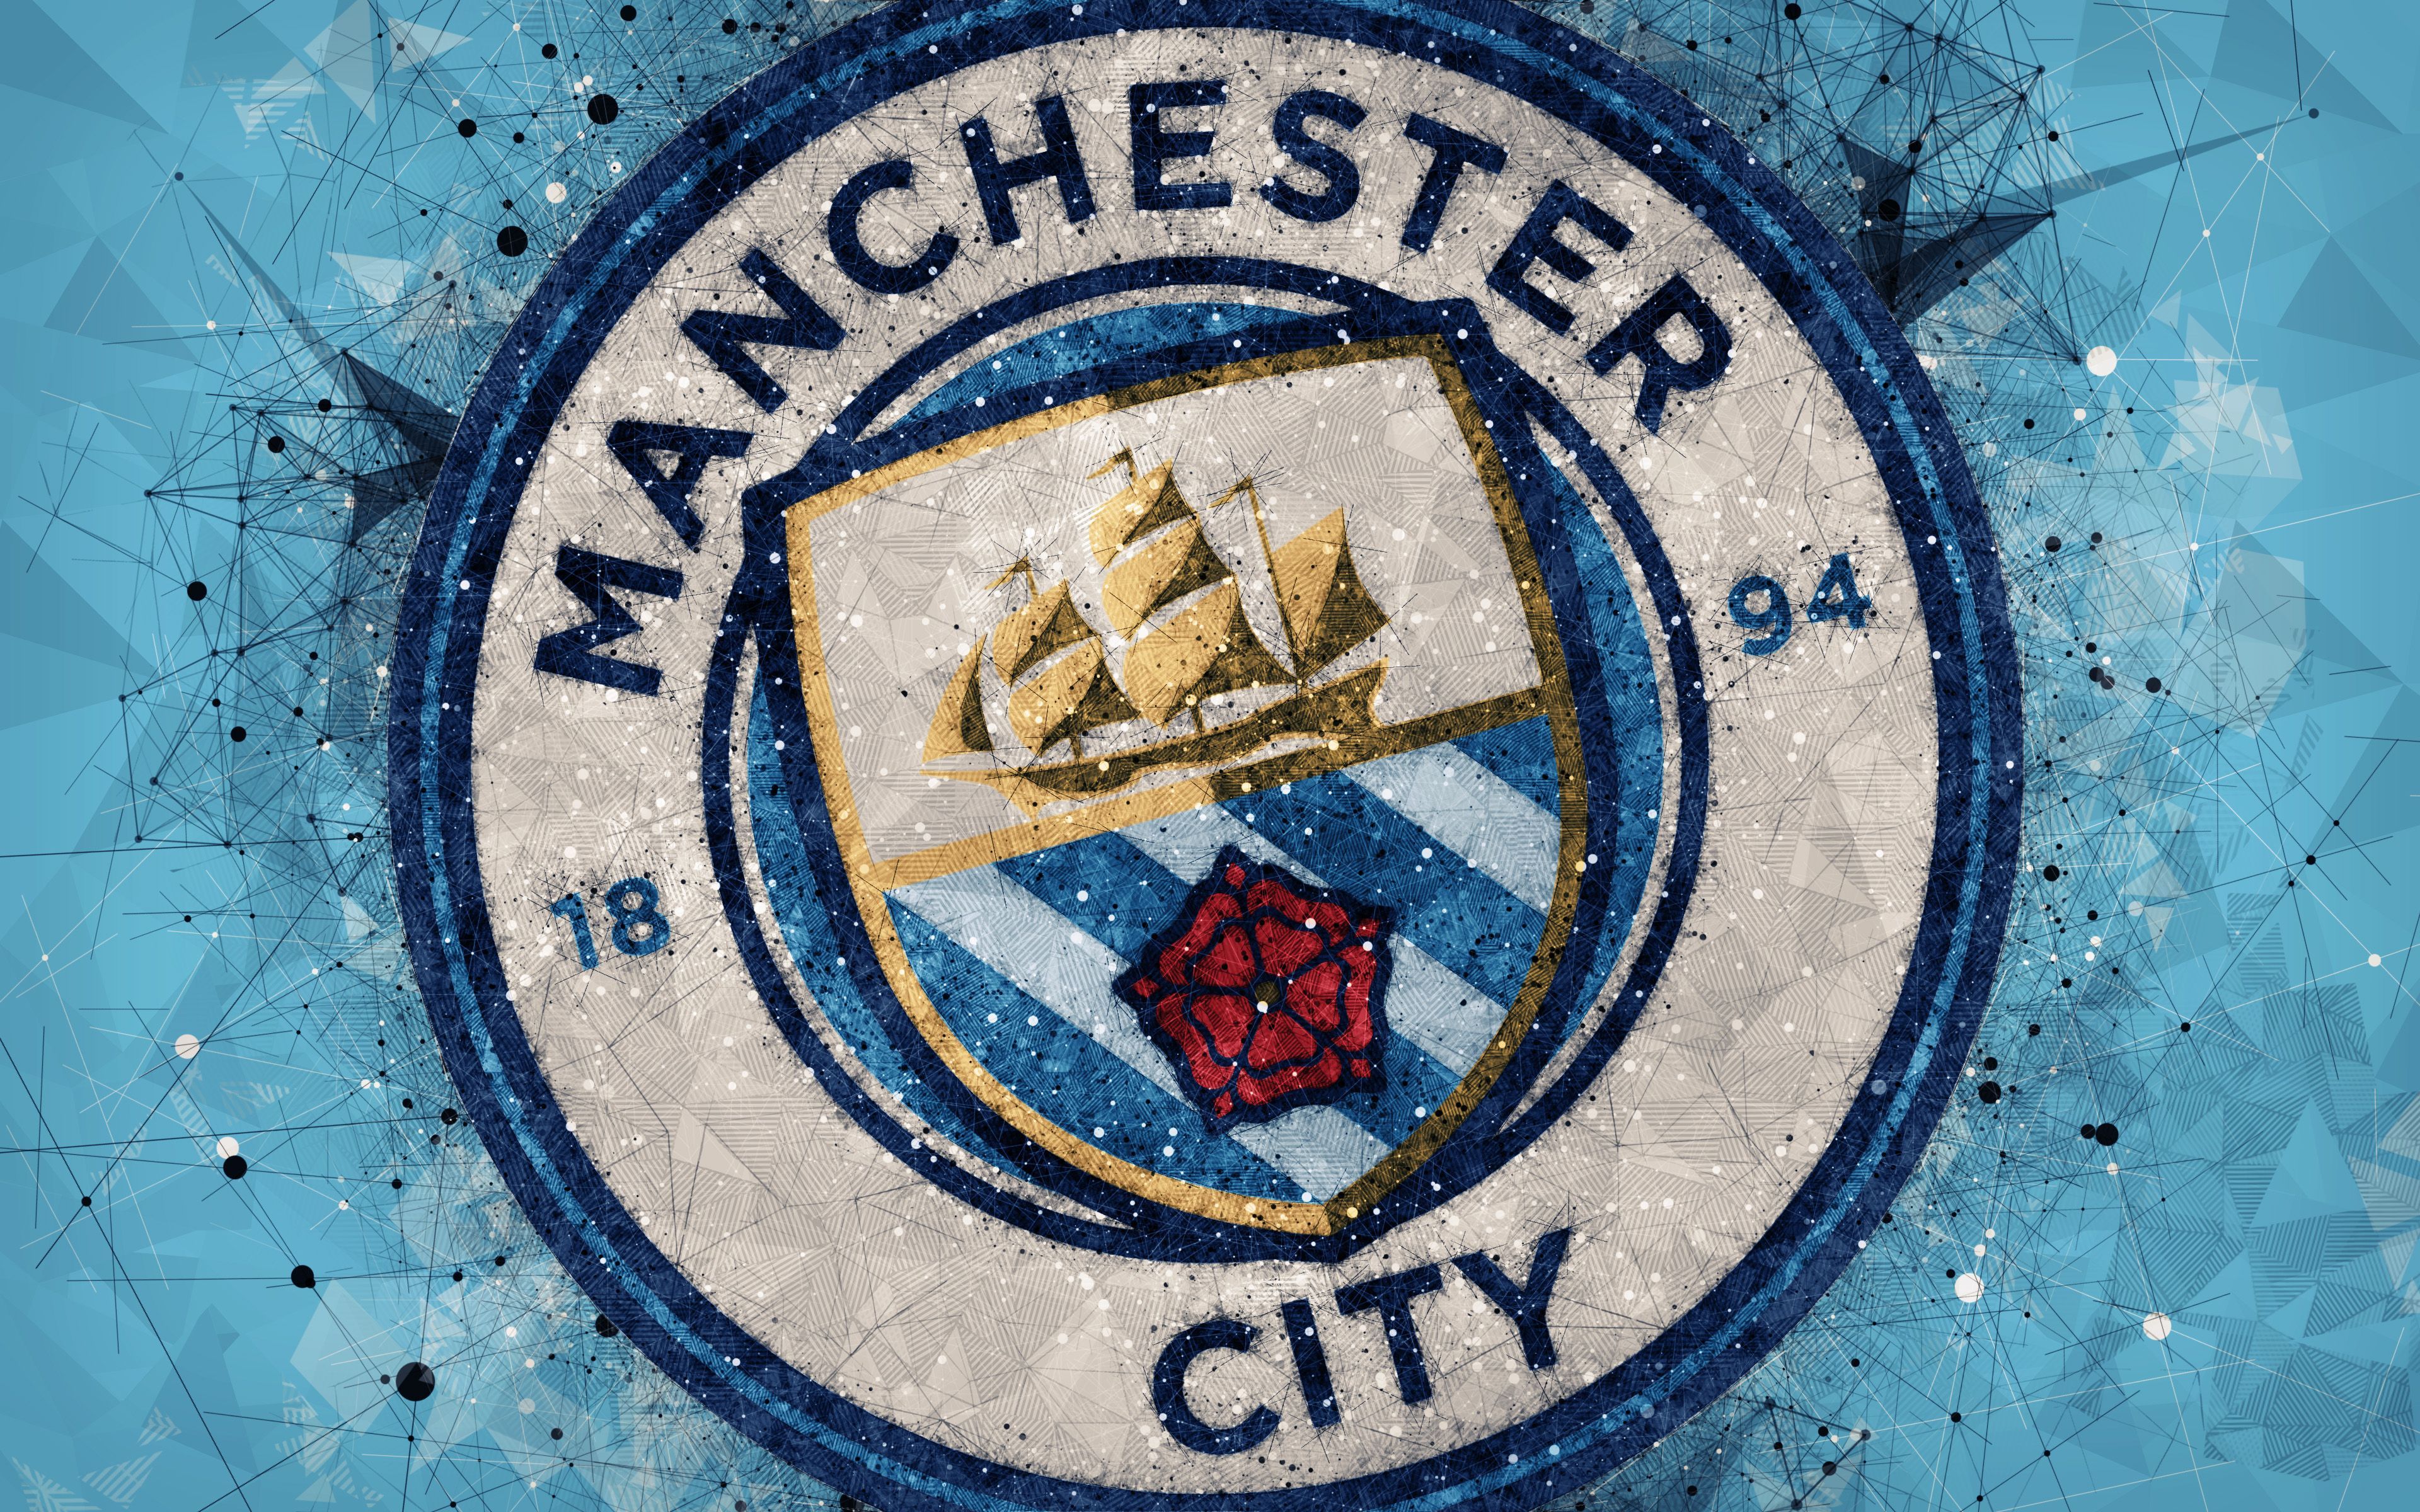 4k PC Manchester City Wallpapers Wallpaper Cave